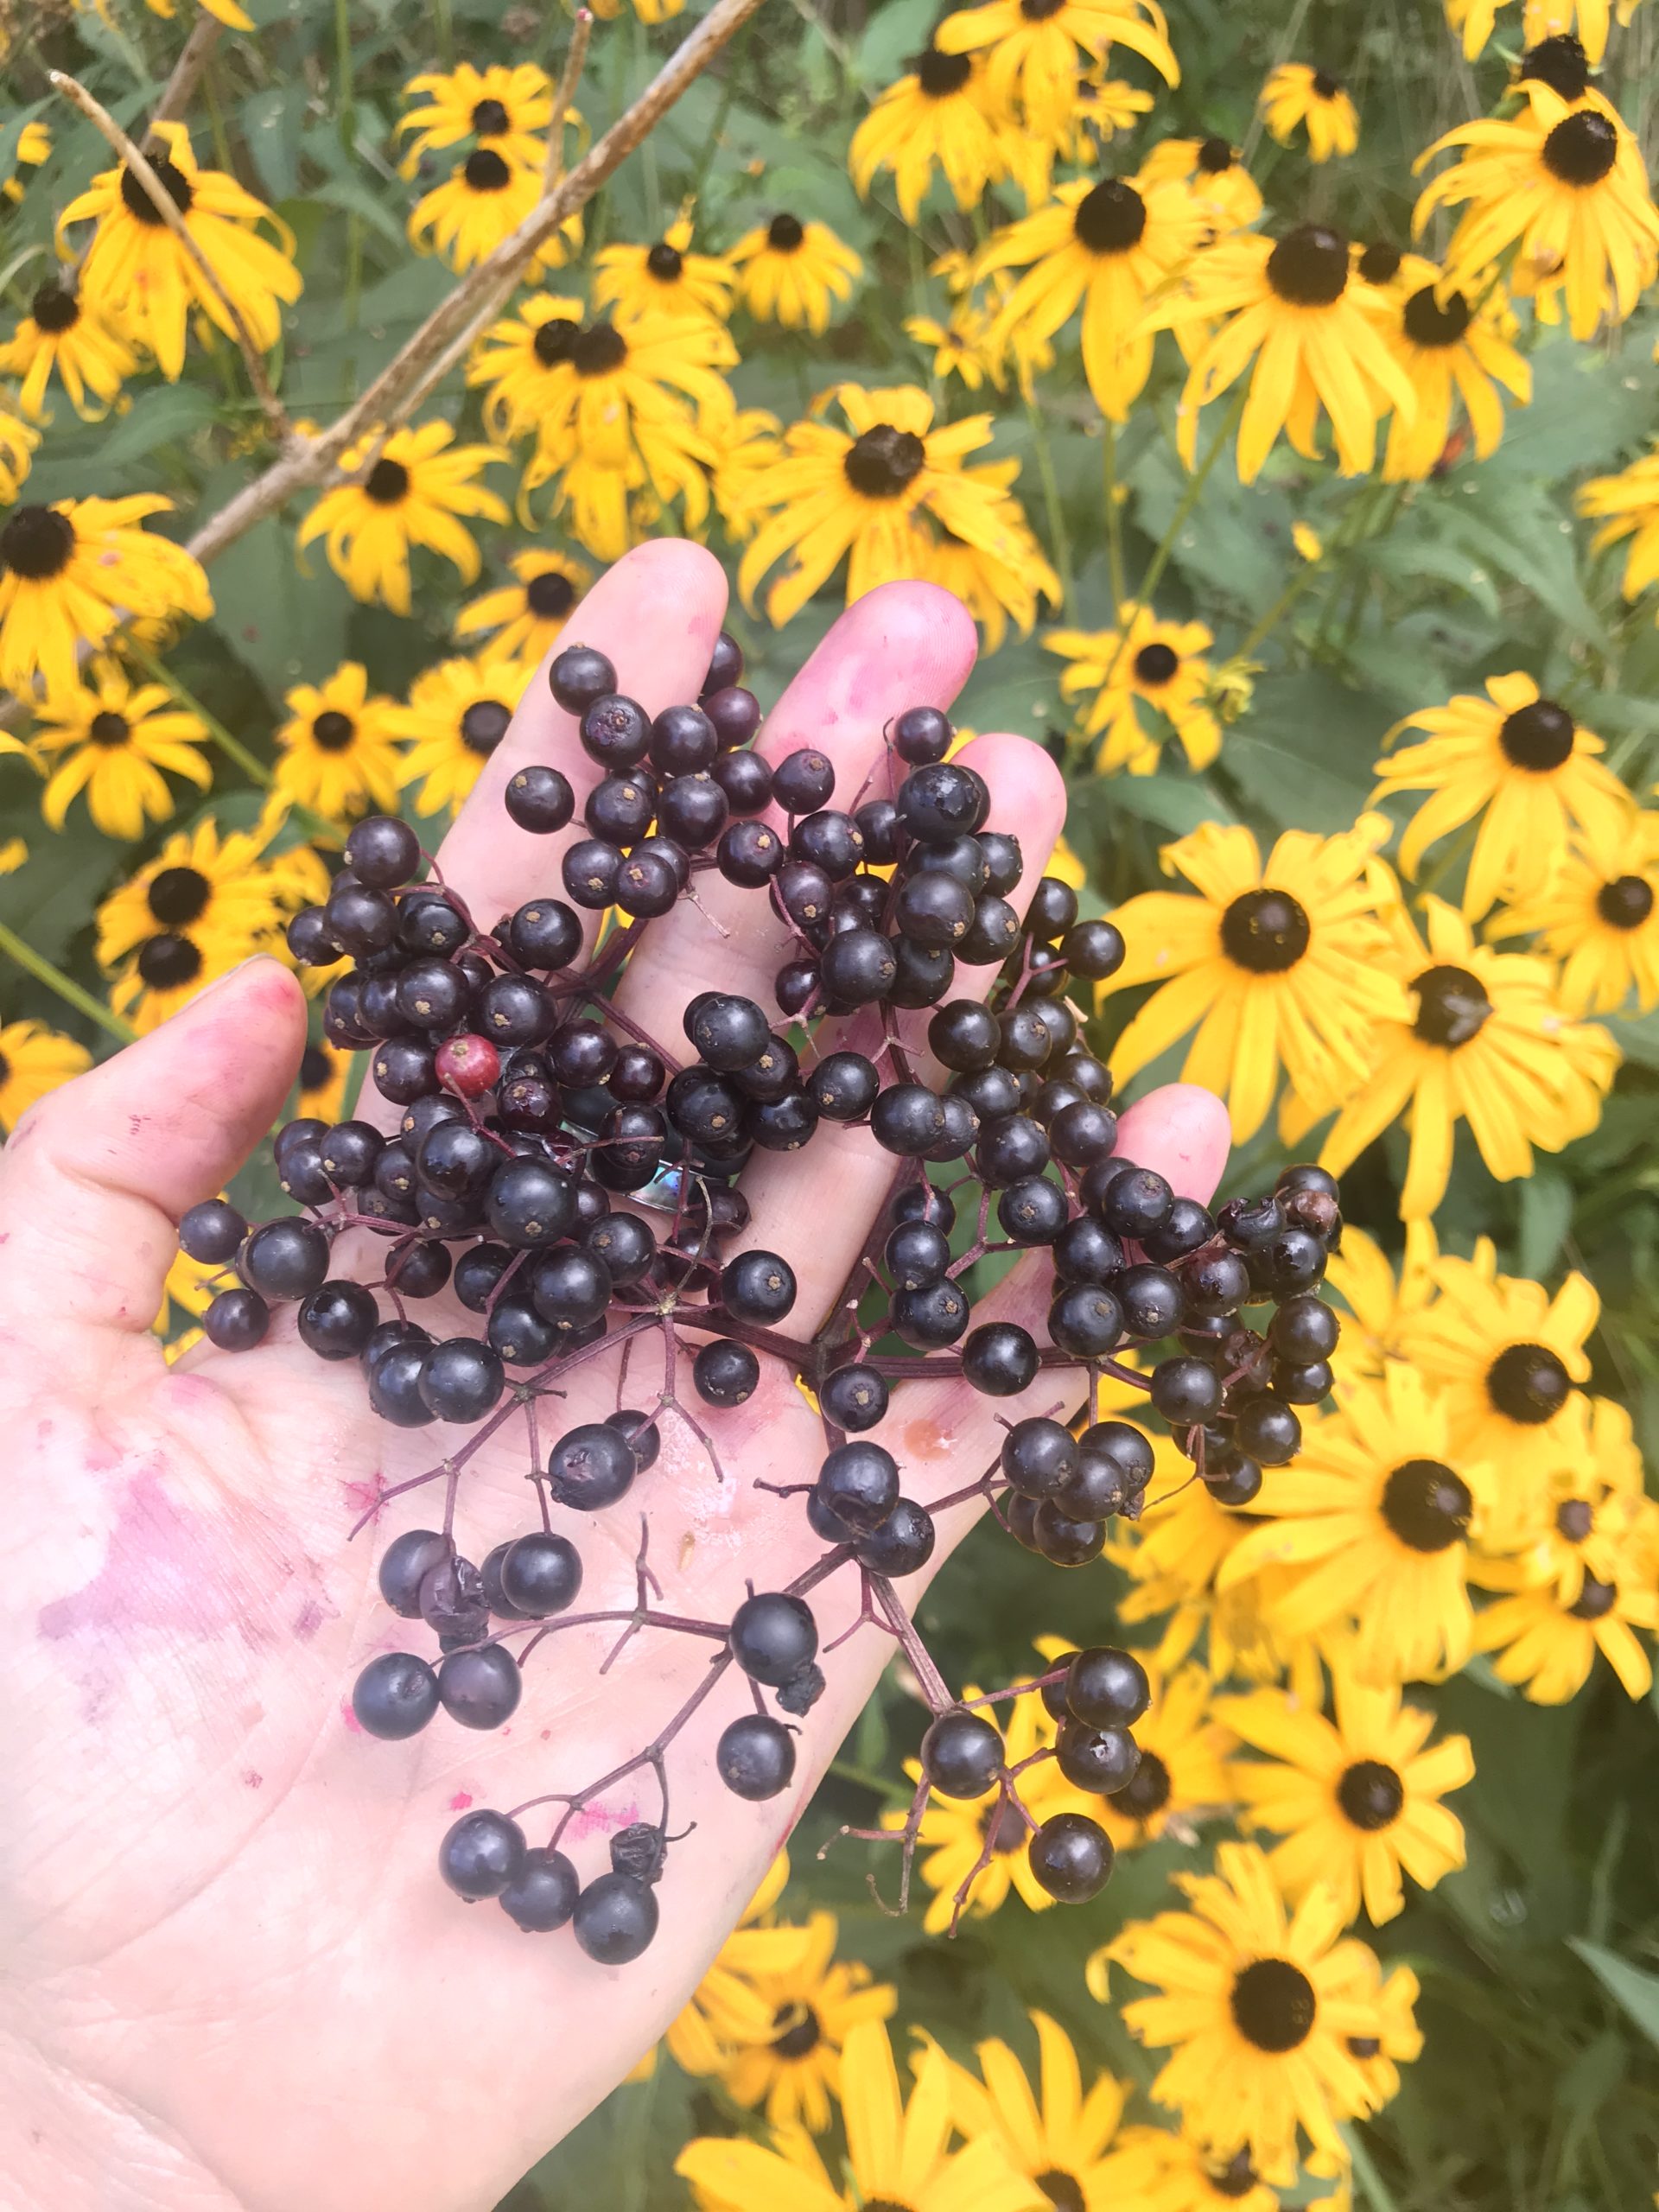 elderberry herbal actions - the science and tradition behind elder - elderberry syrup information